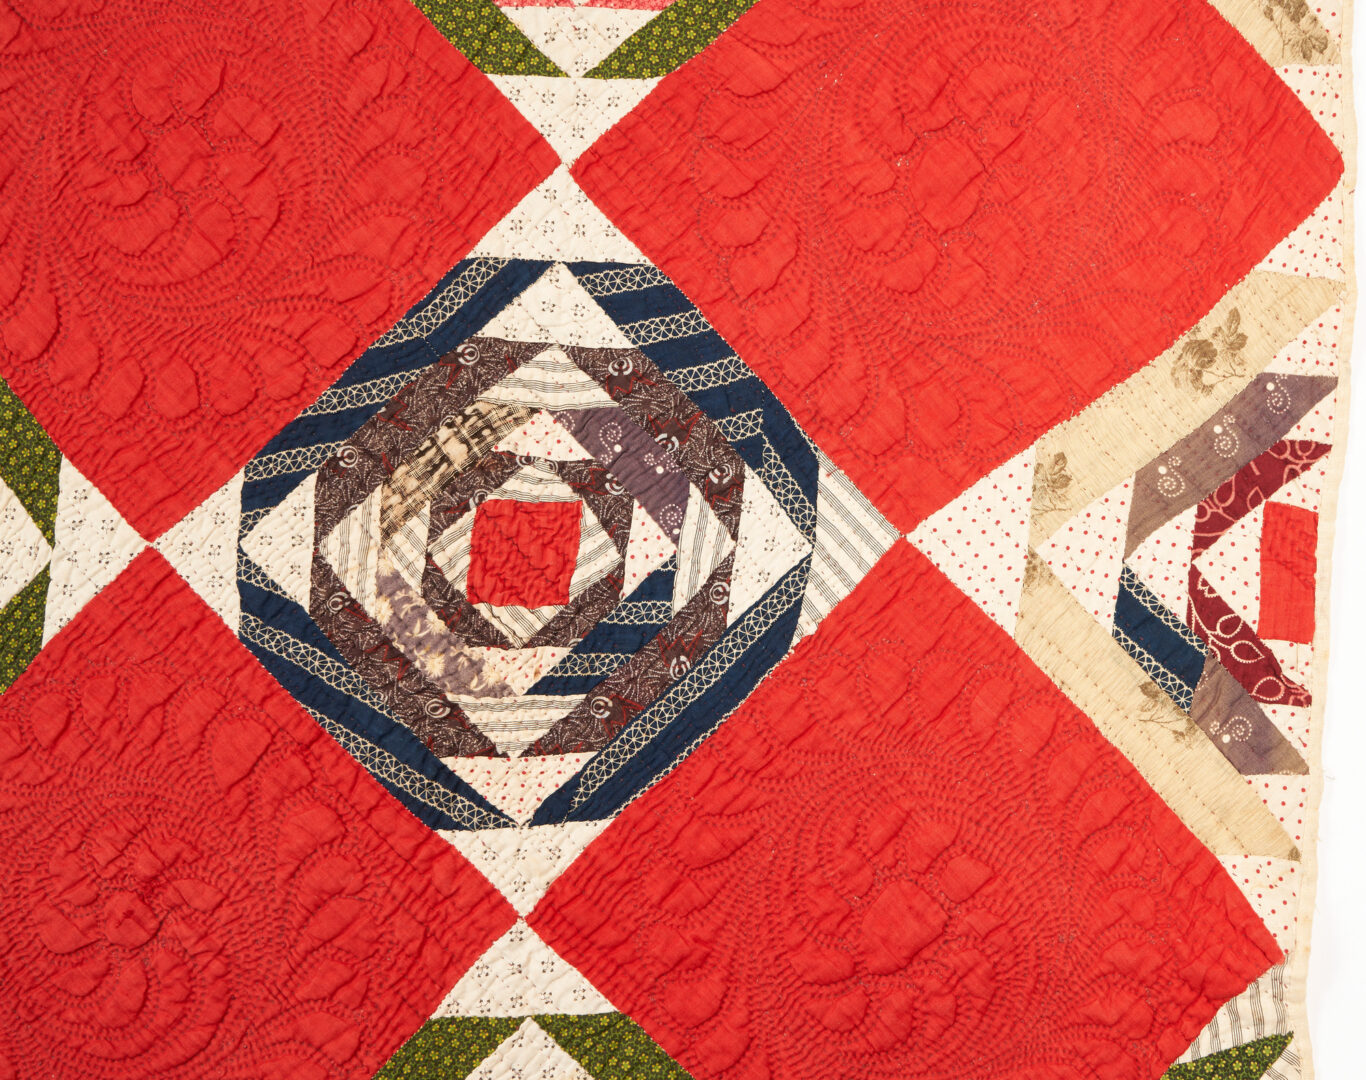 Lot 950: Log Cabin Quilt, Pineapple Layout Circa 1900-1910